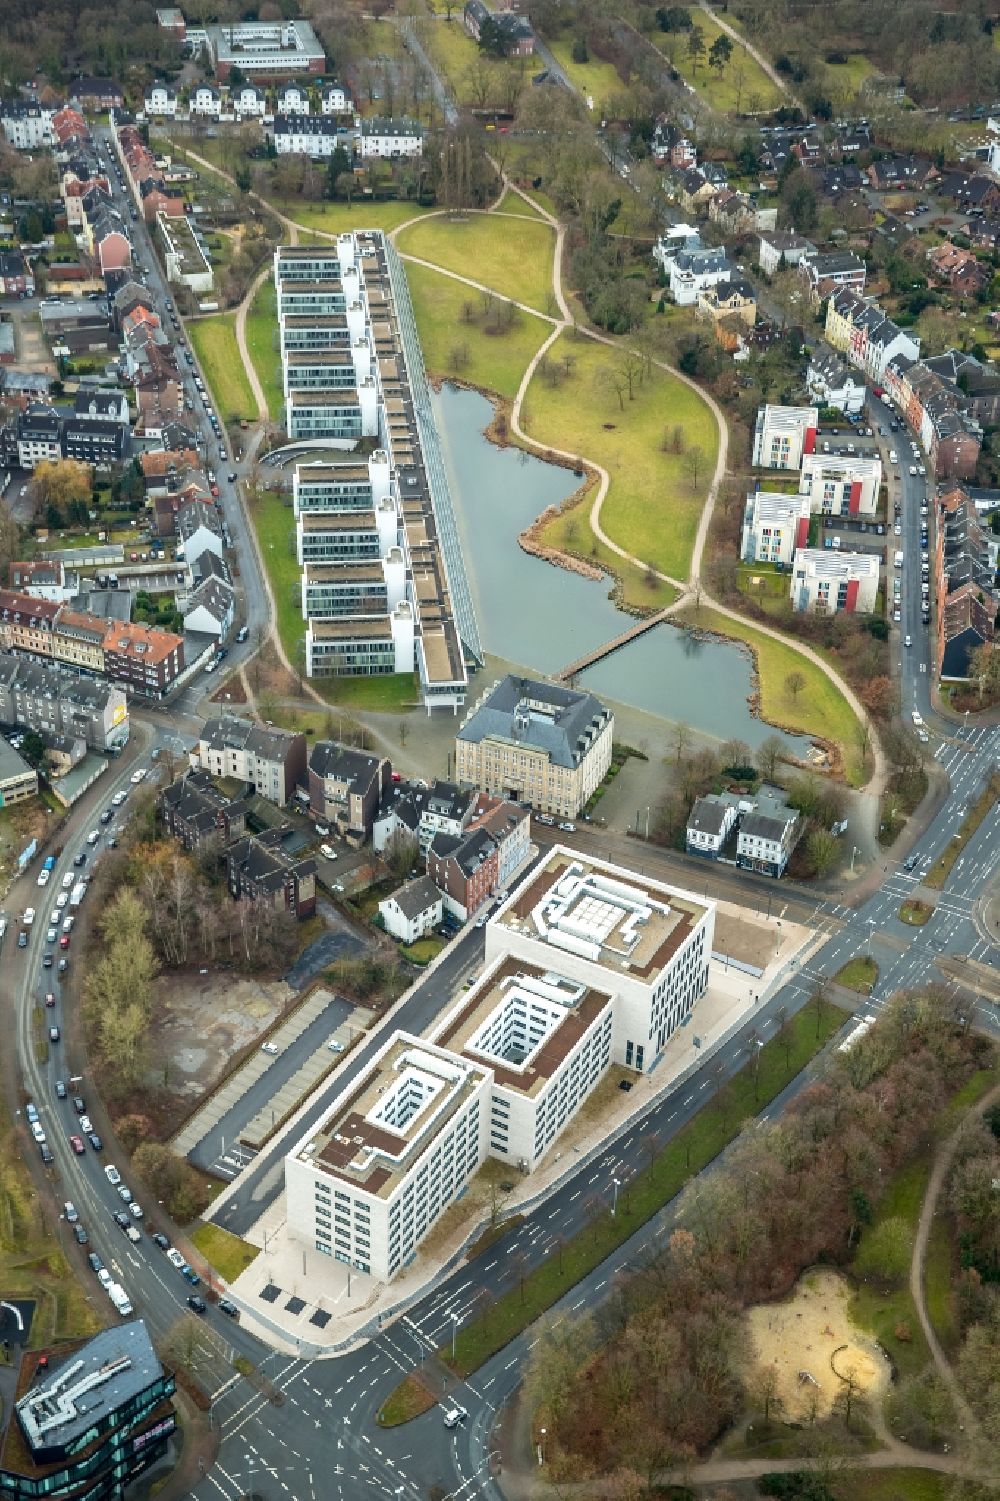 Gelsenkirchen from above - Building complex of the new center of Justice of Gelsenkirchen in the state of North Rhine-Westphalia